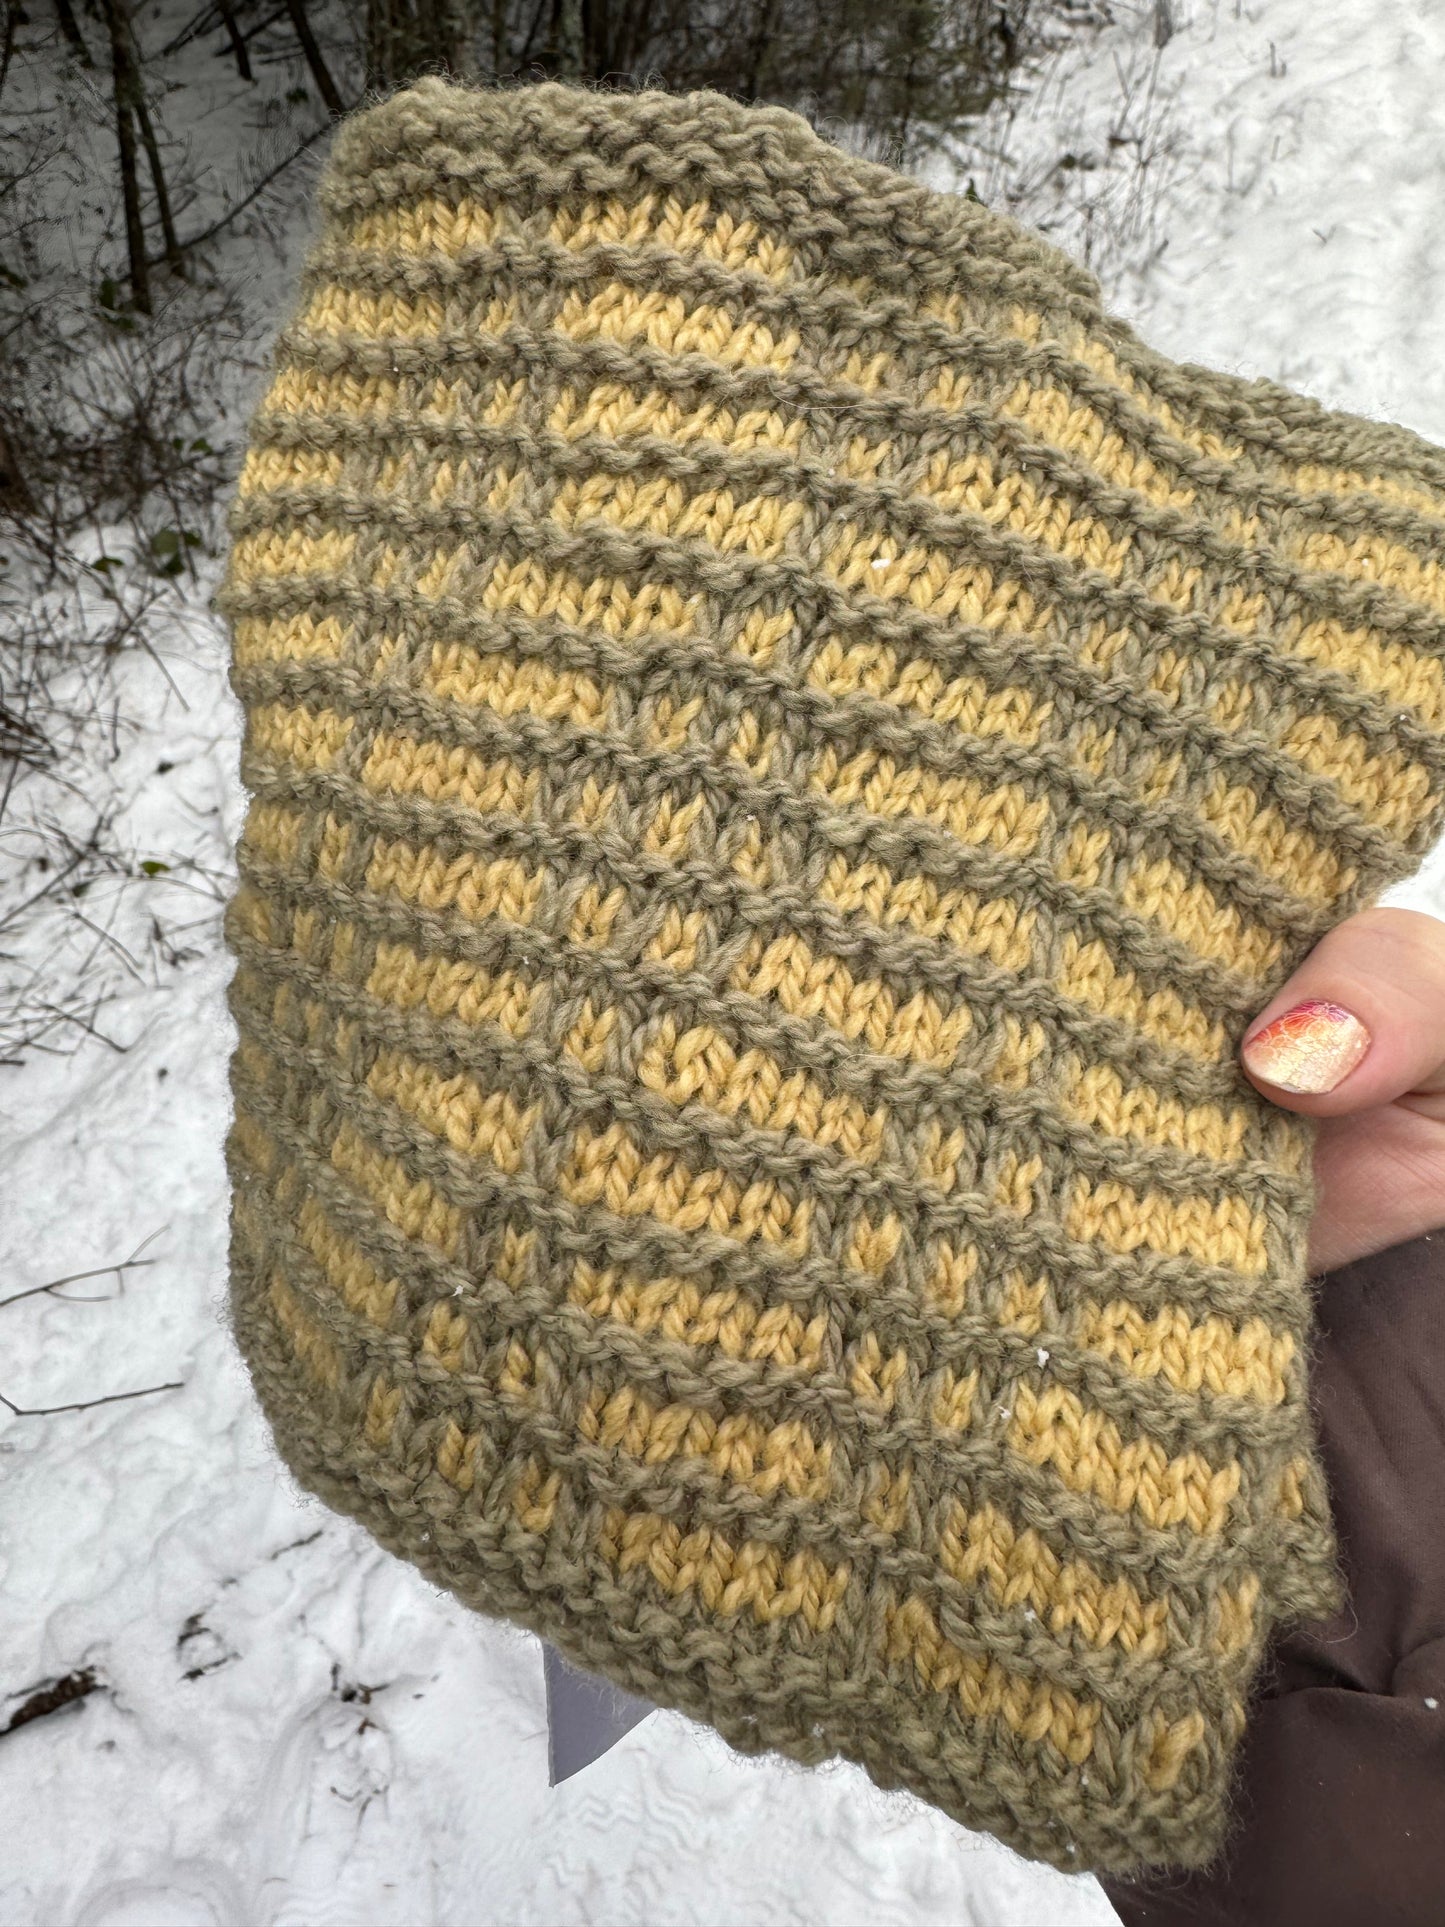 Naturally Dyed  Patterned Handknit MT Wool Cowl